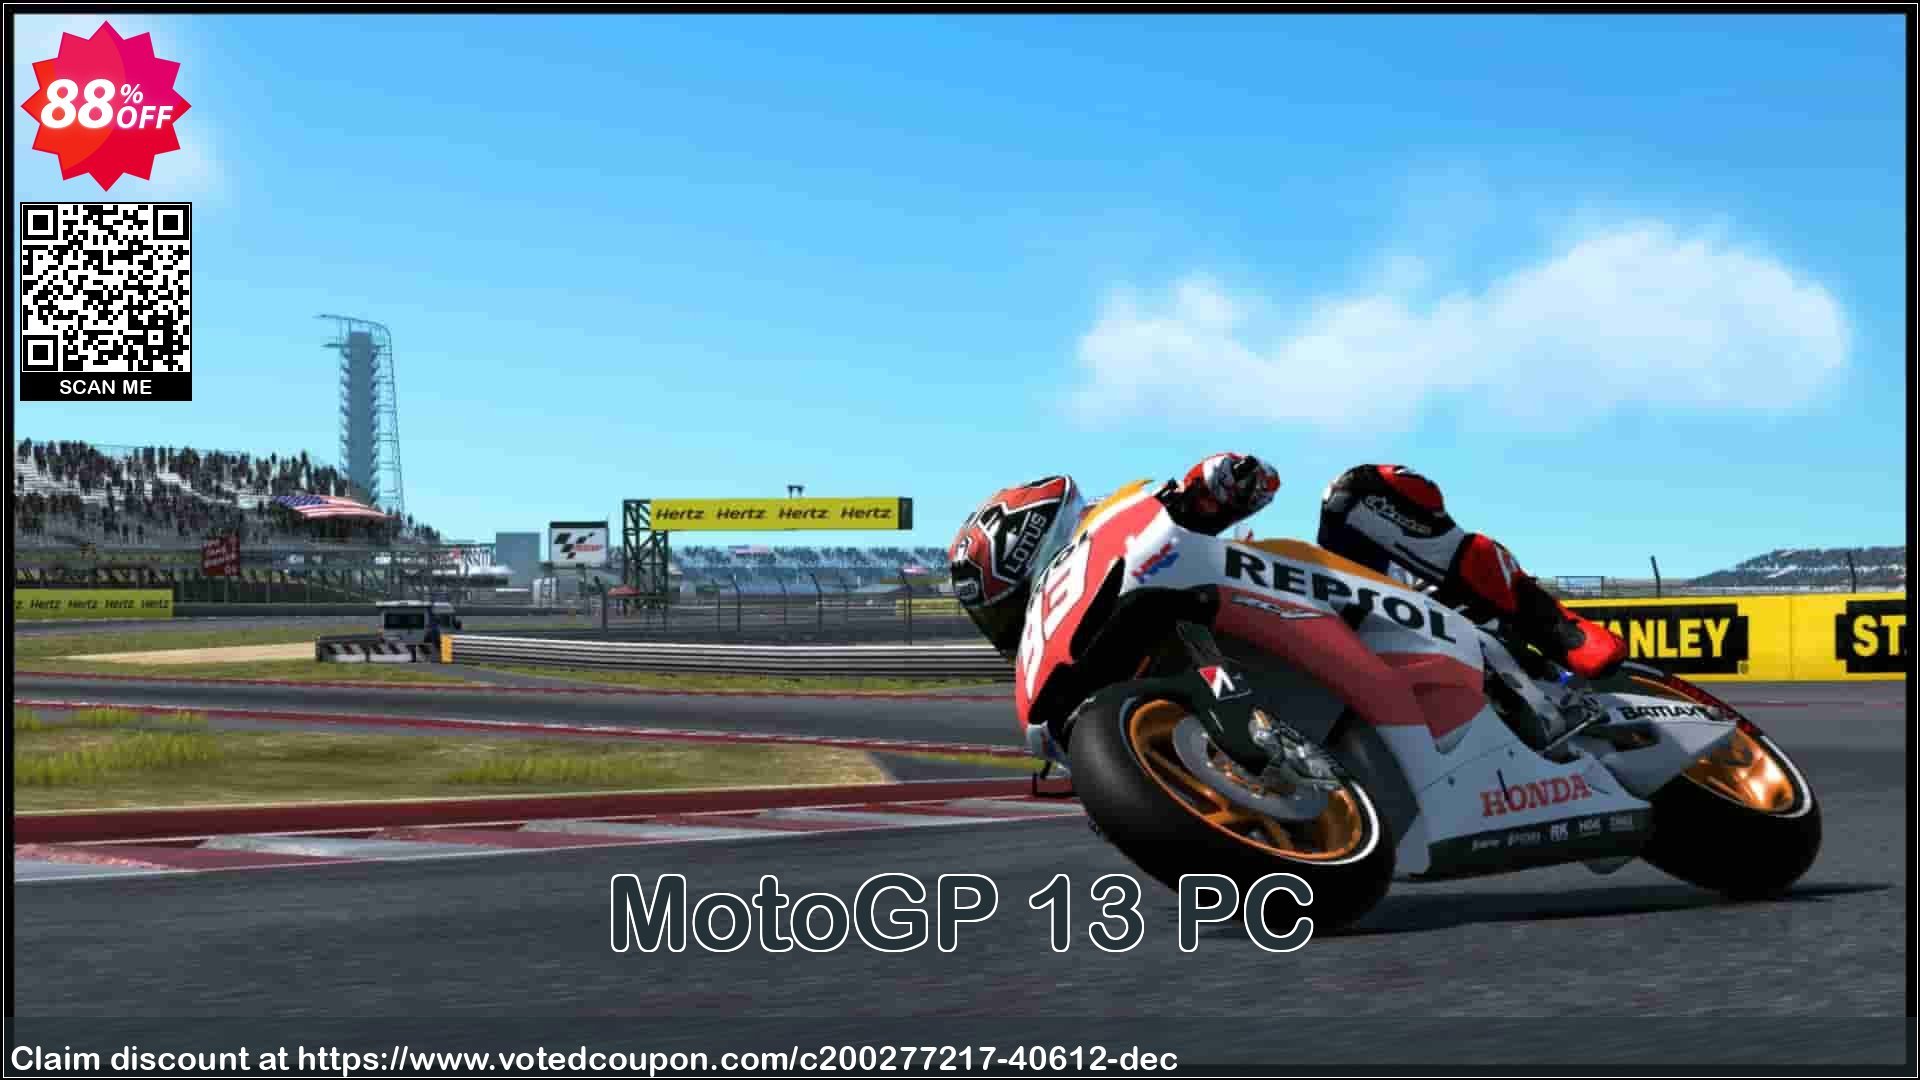 MotoGP 13 PC Coupon Code May 2024, 88% OFF - VotedCoupon